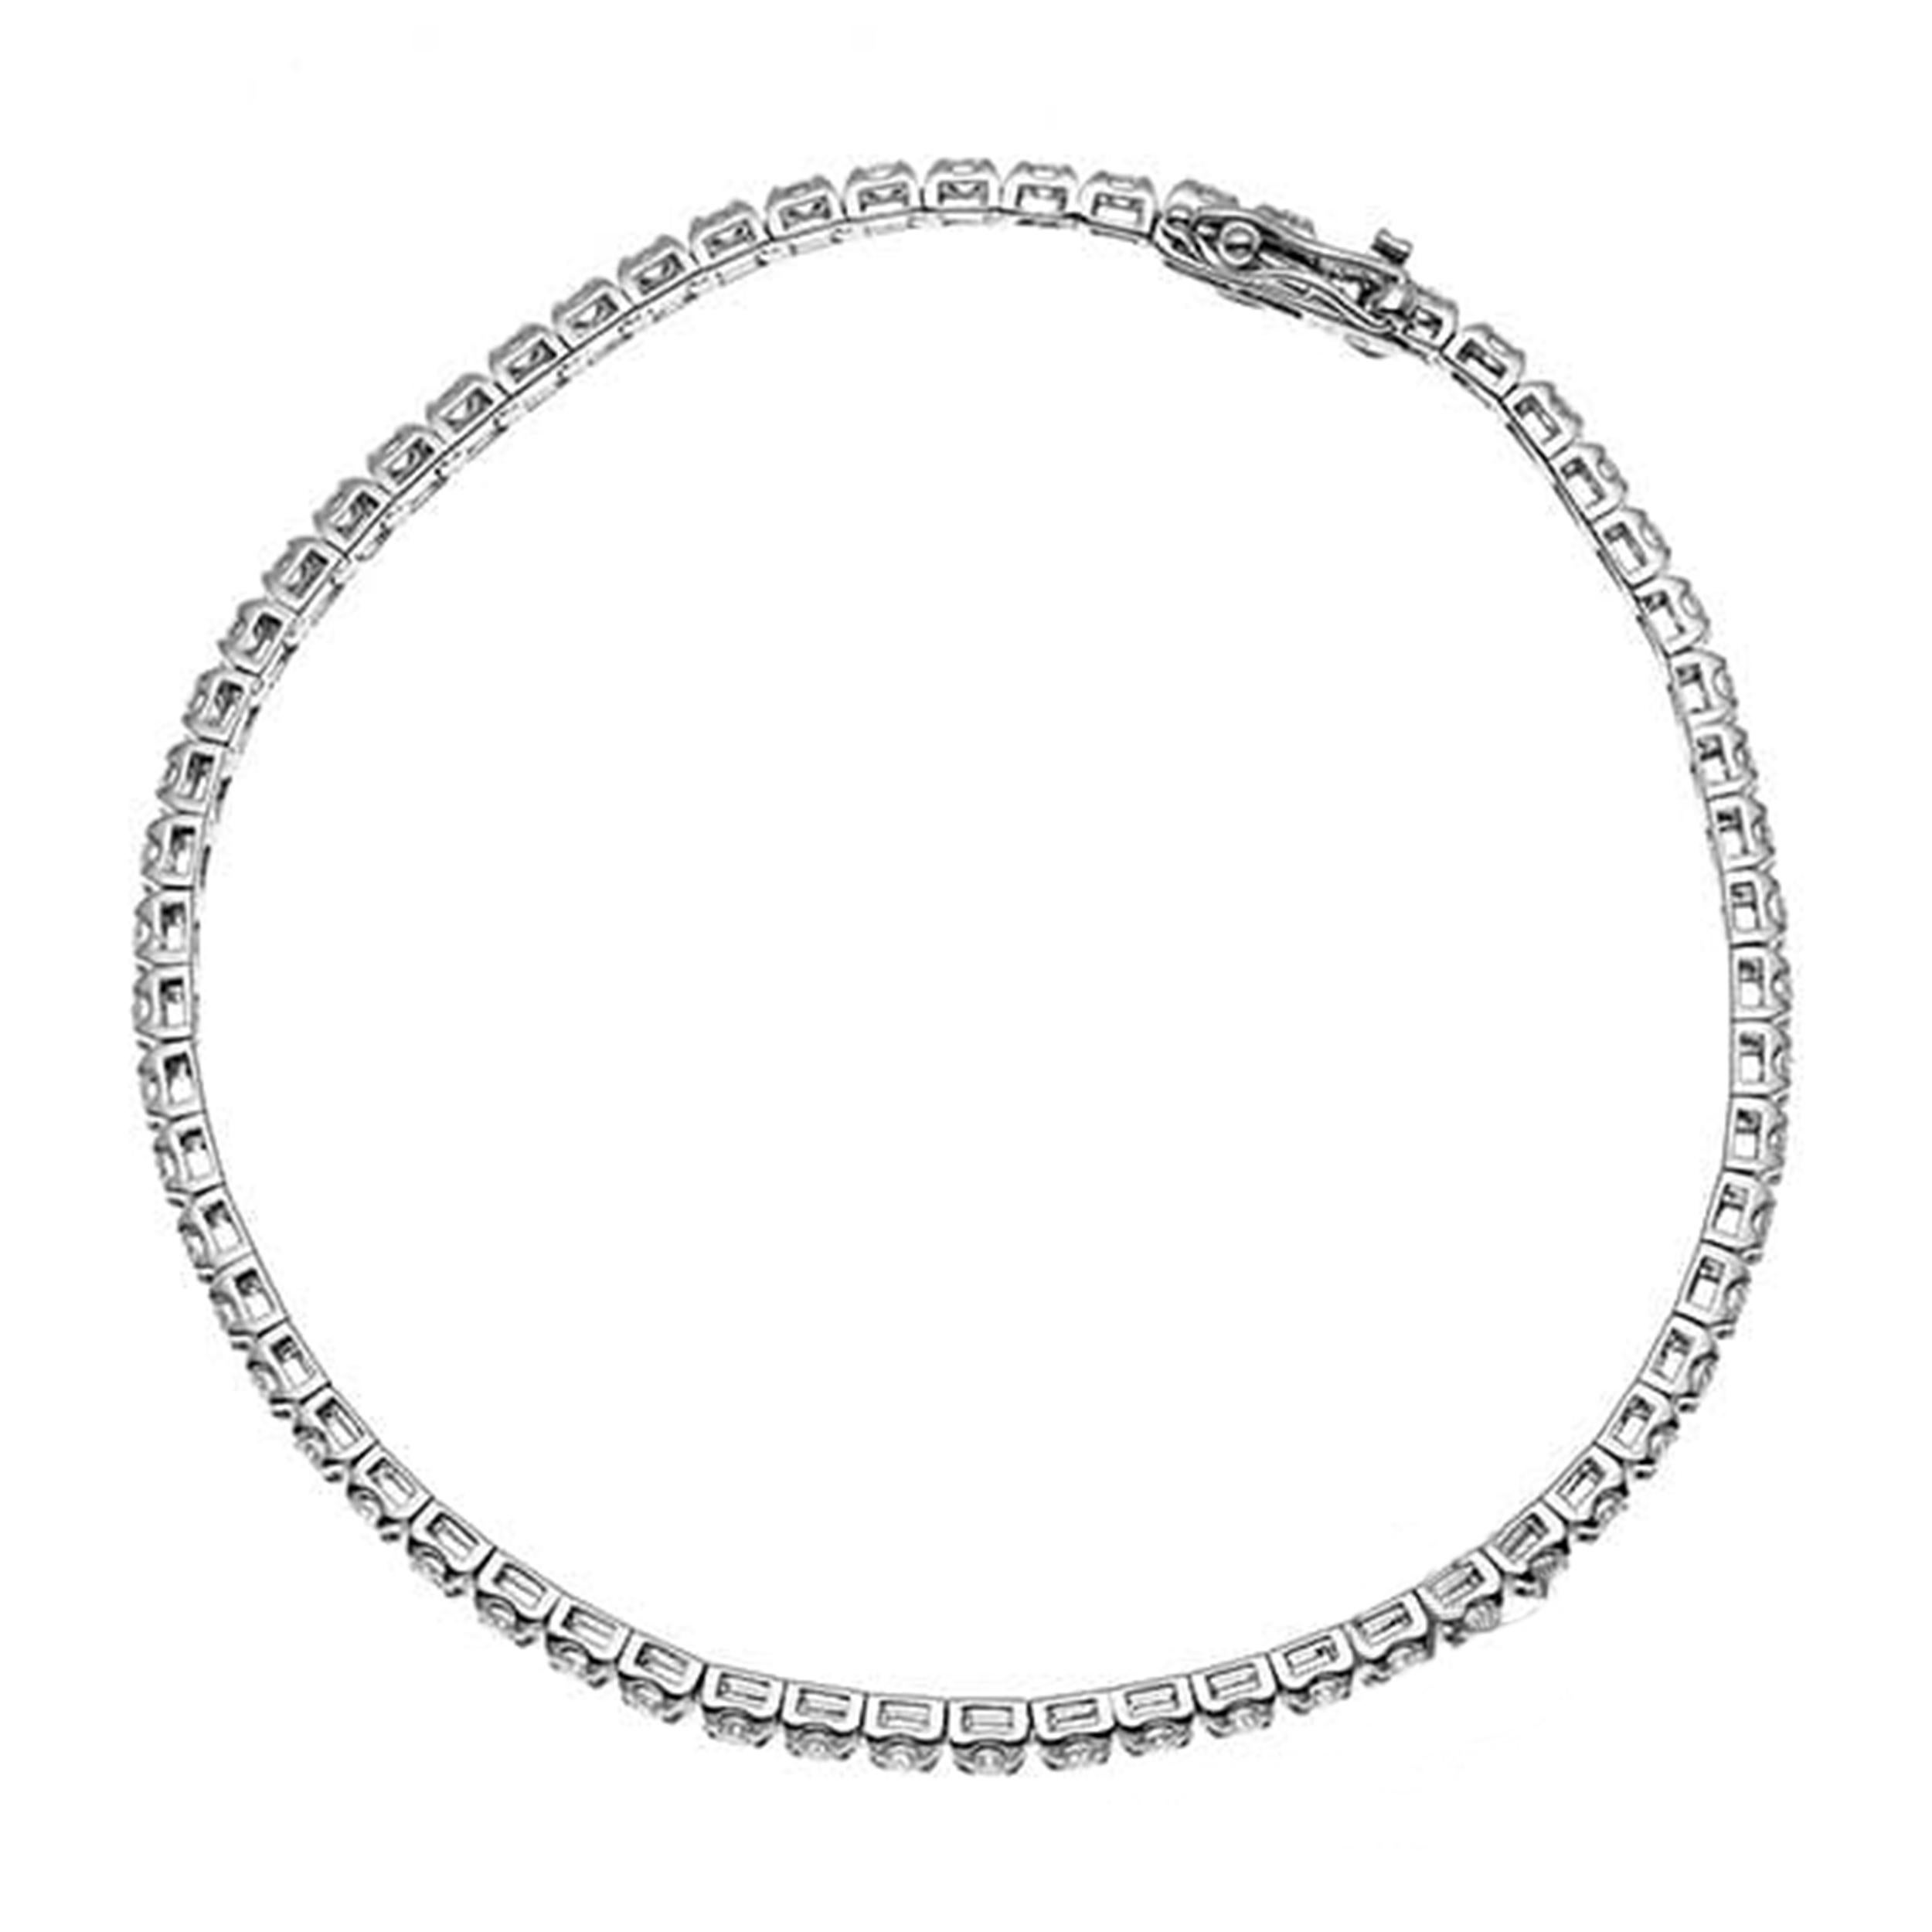 Elevate your wrist with this stunning 18K white gold diamond tennis bracelet. Adorned with 52 dazzling diamonds totaling 5.17 carats, this bracelet is a timeless and luxurious addition to any jewelry collection. Each diamond is meticulously set in a